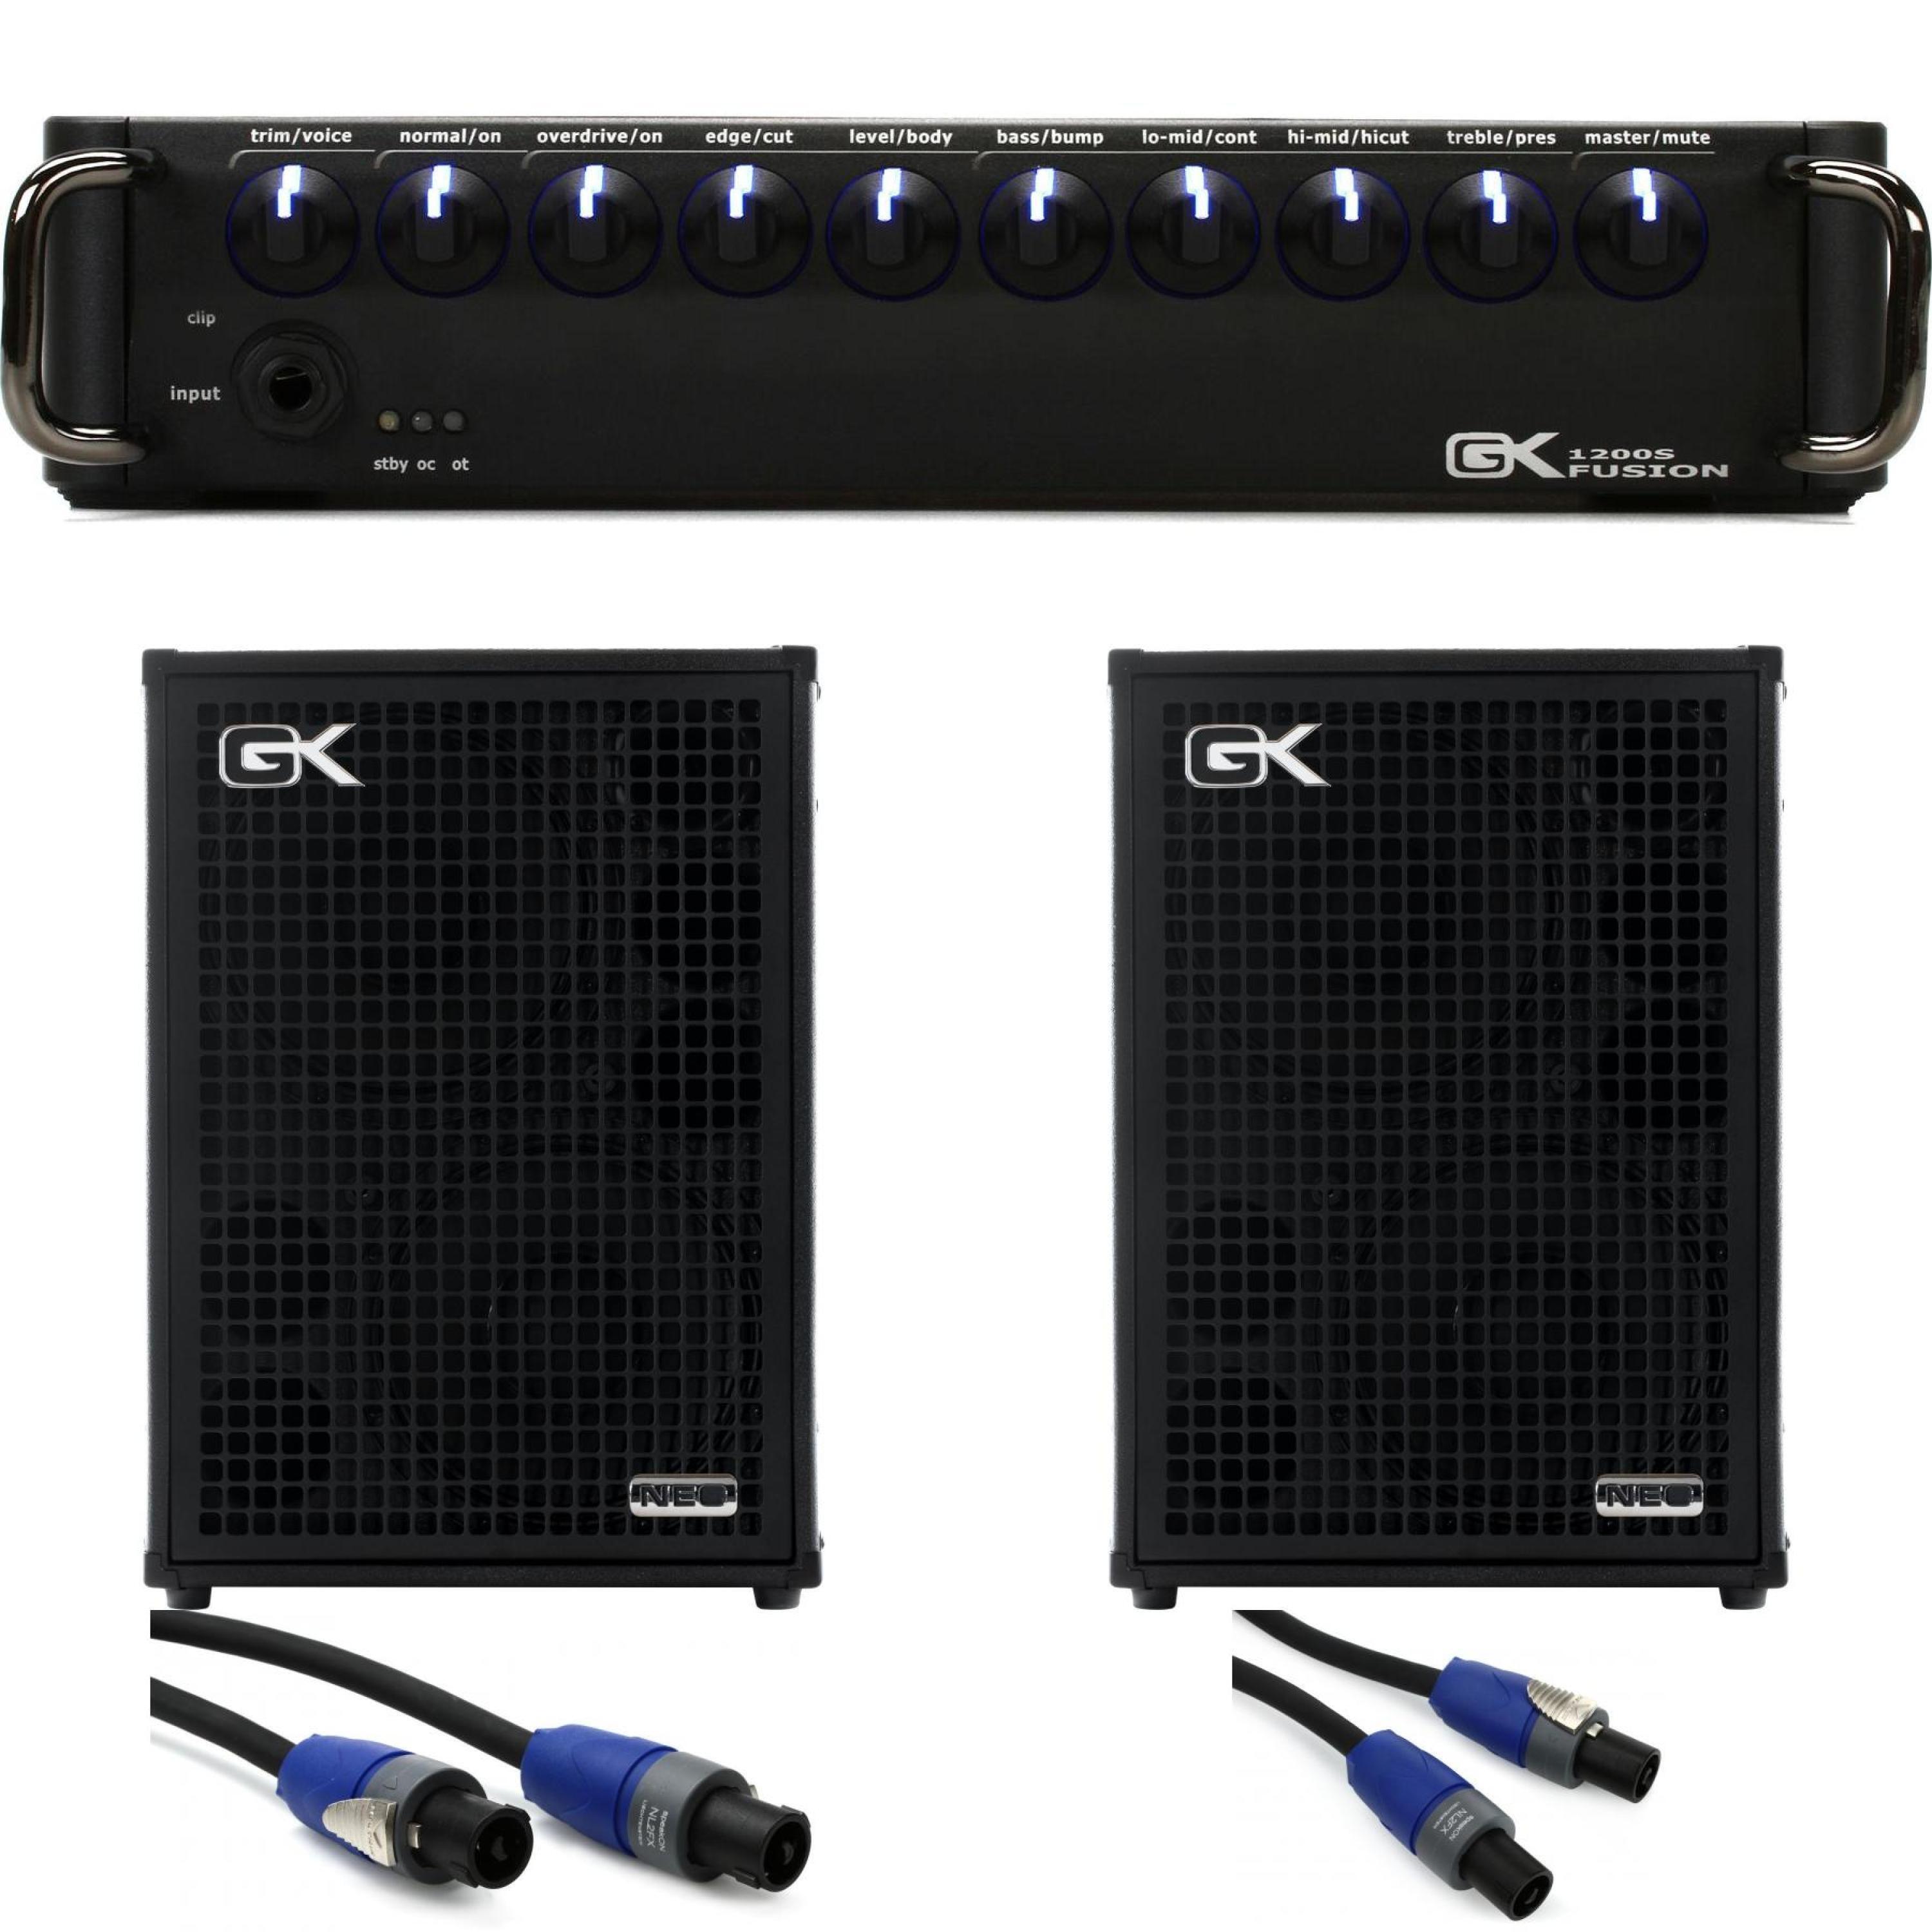 Gallien-Krueger Fusion 1200S and 2x Neo IV 2x12-inch Cabs Bundle